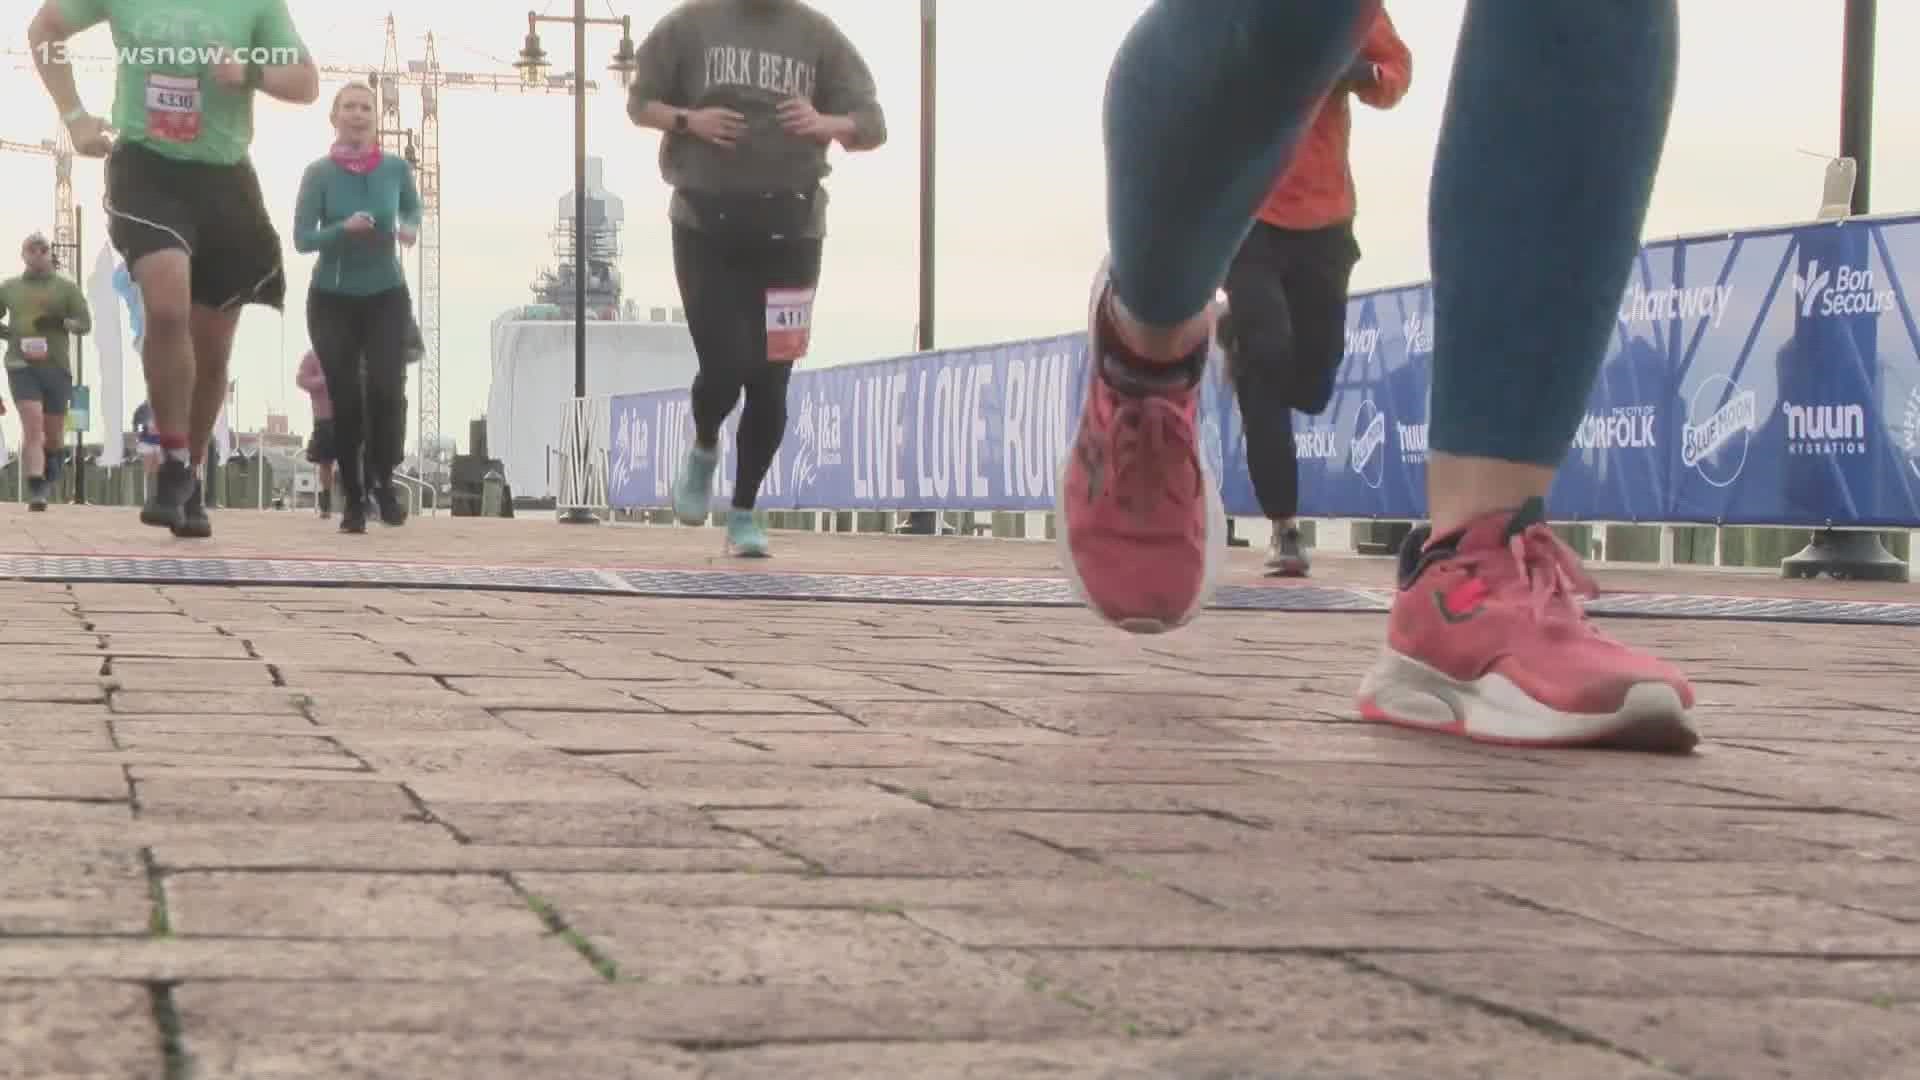 3,000 runners from 35 states participated in the half marathon's ninth year.